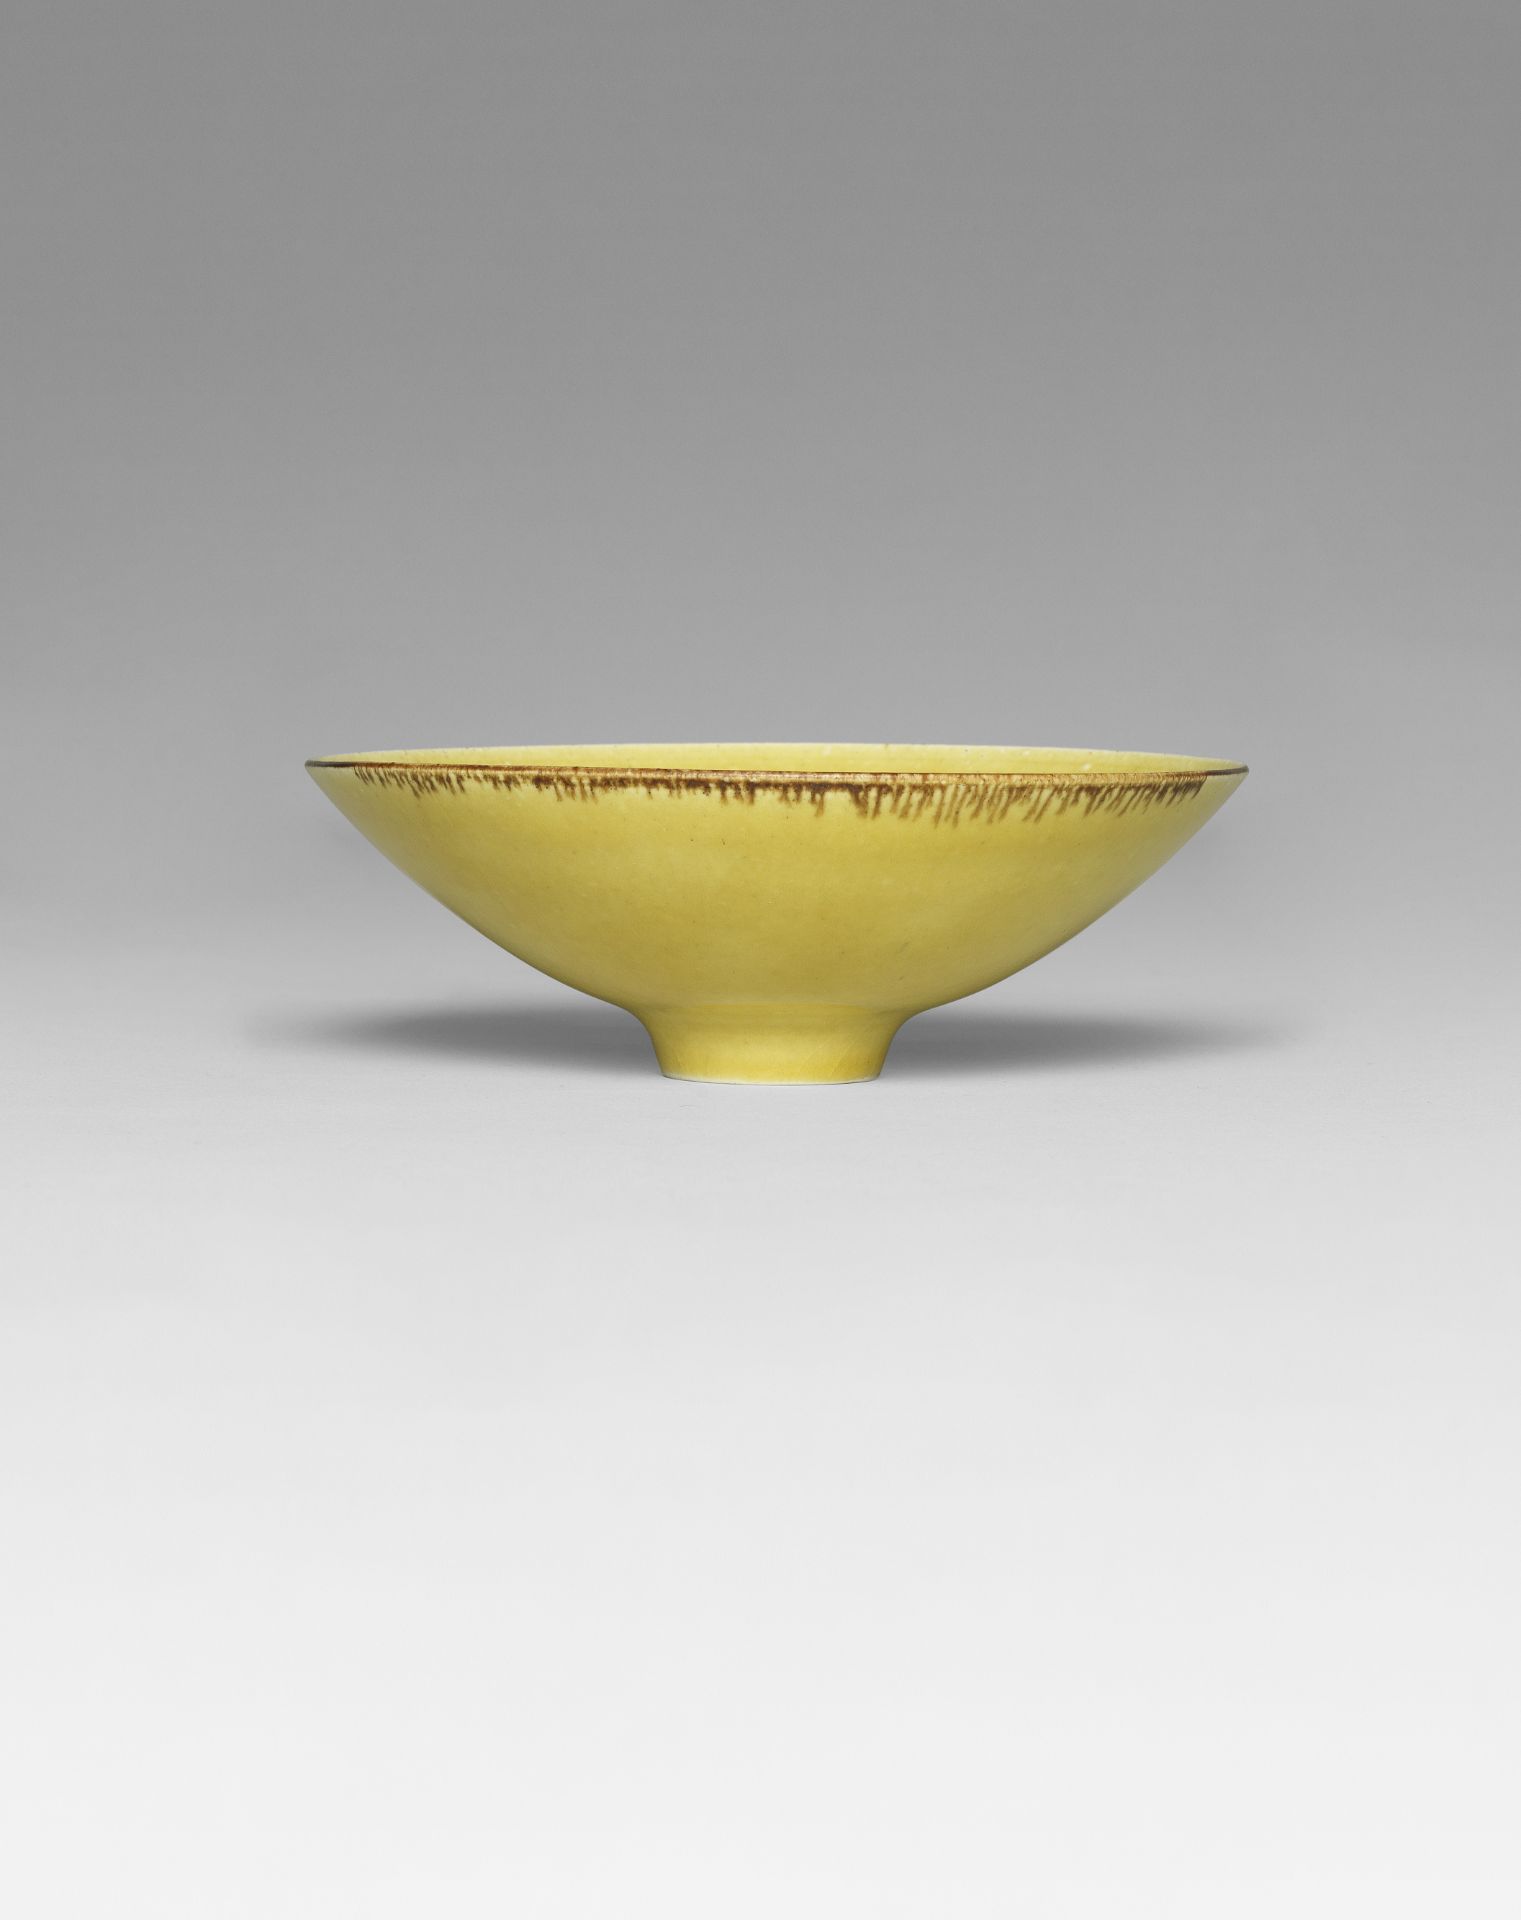 Lucie Rie Footed bowl, circa 1965